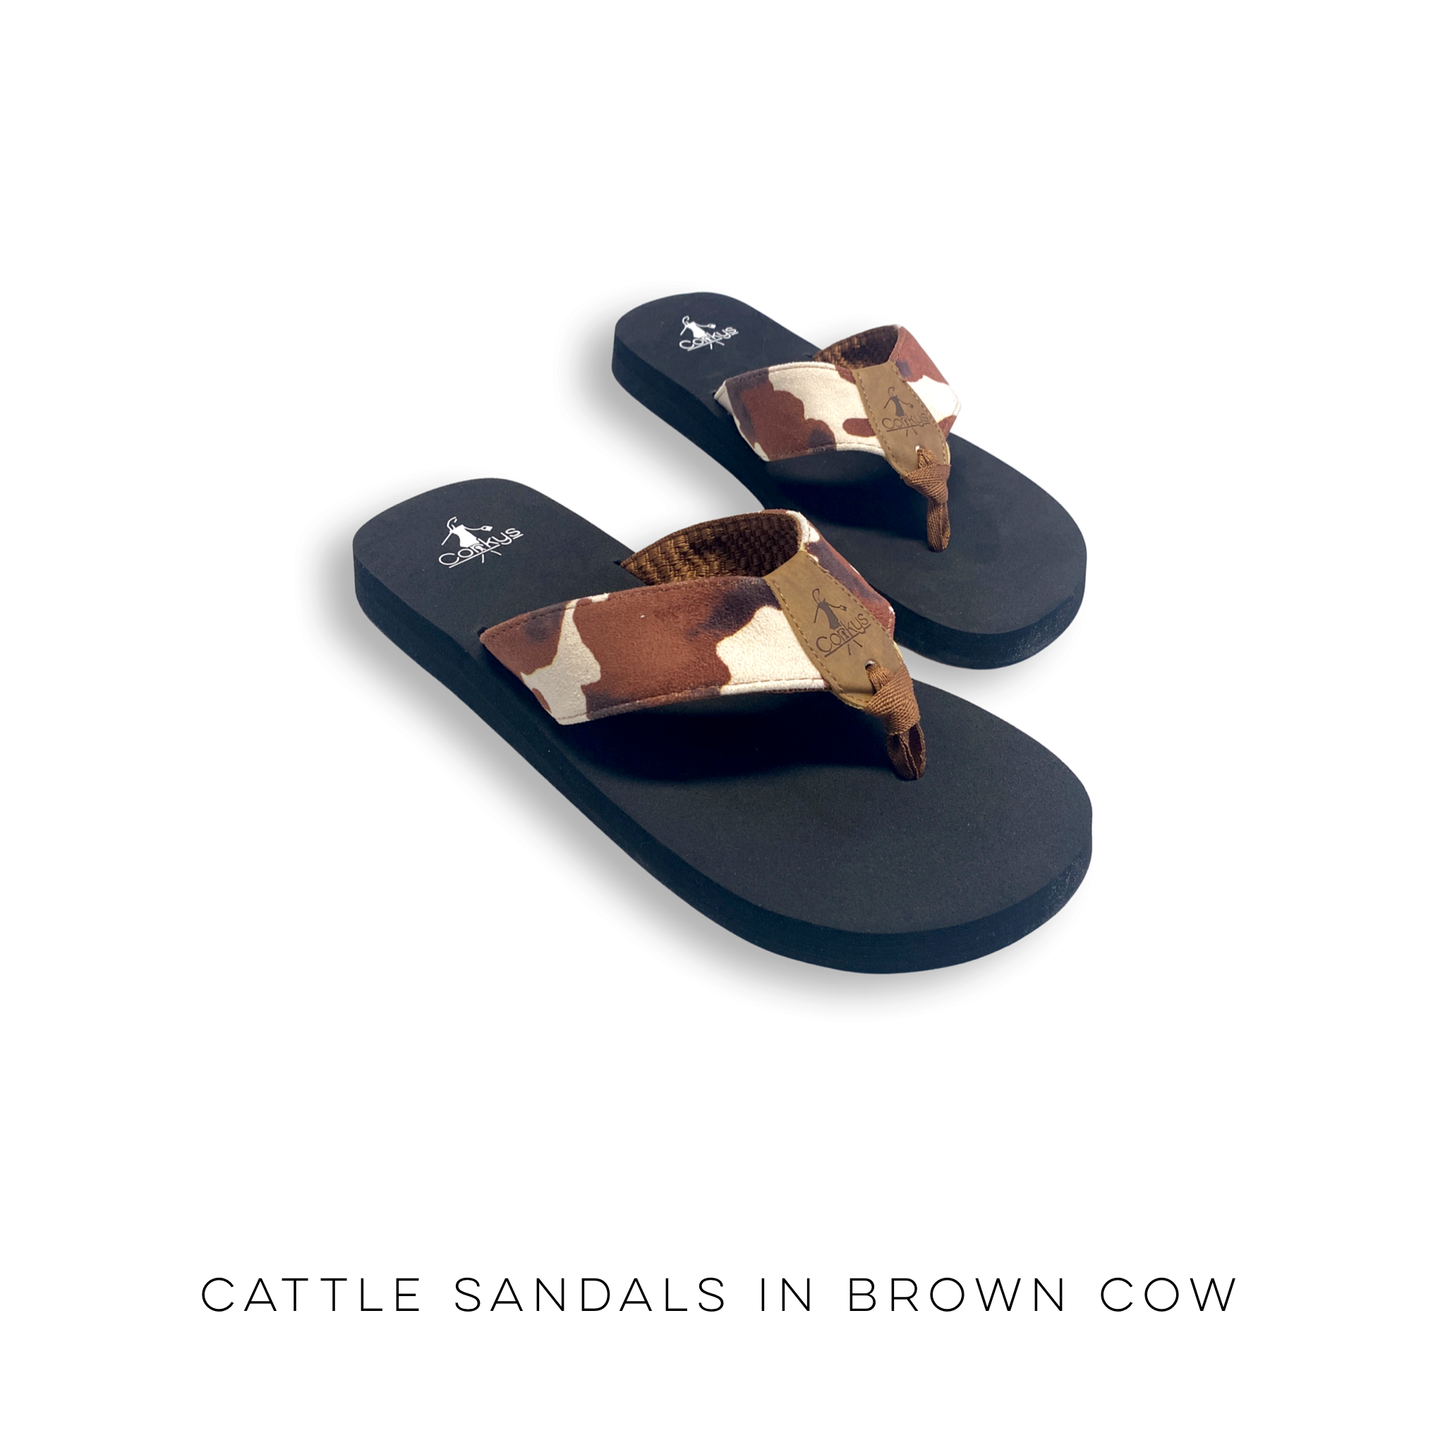 Cattle Sandals in Brown Cow